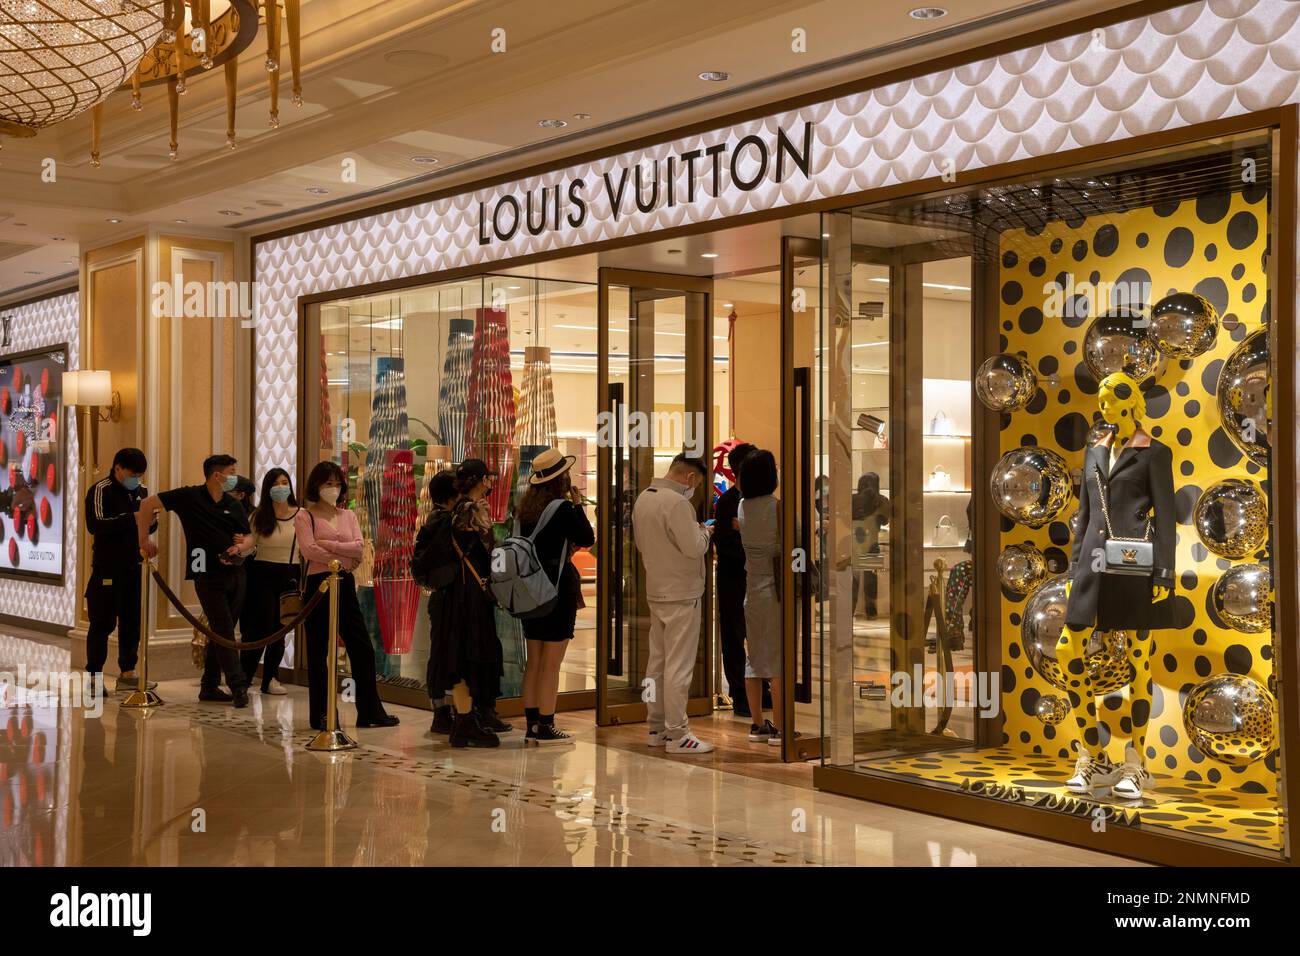 BUYERS SHOPPING IN THE LOUIS VUITTON BOUTIQUE IN THE SHOPPING